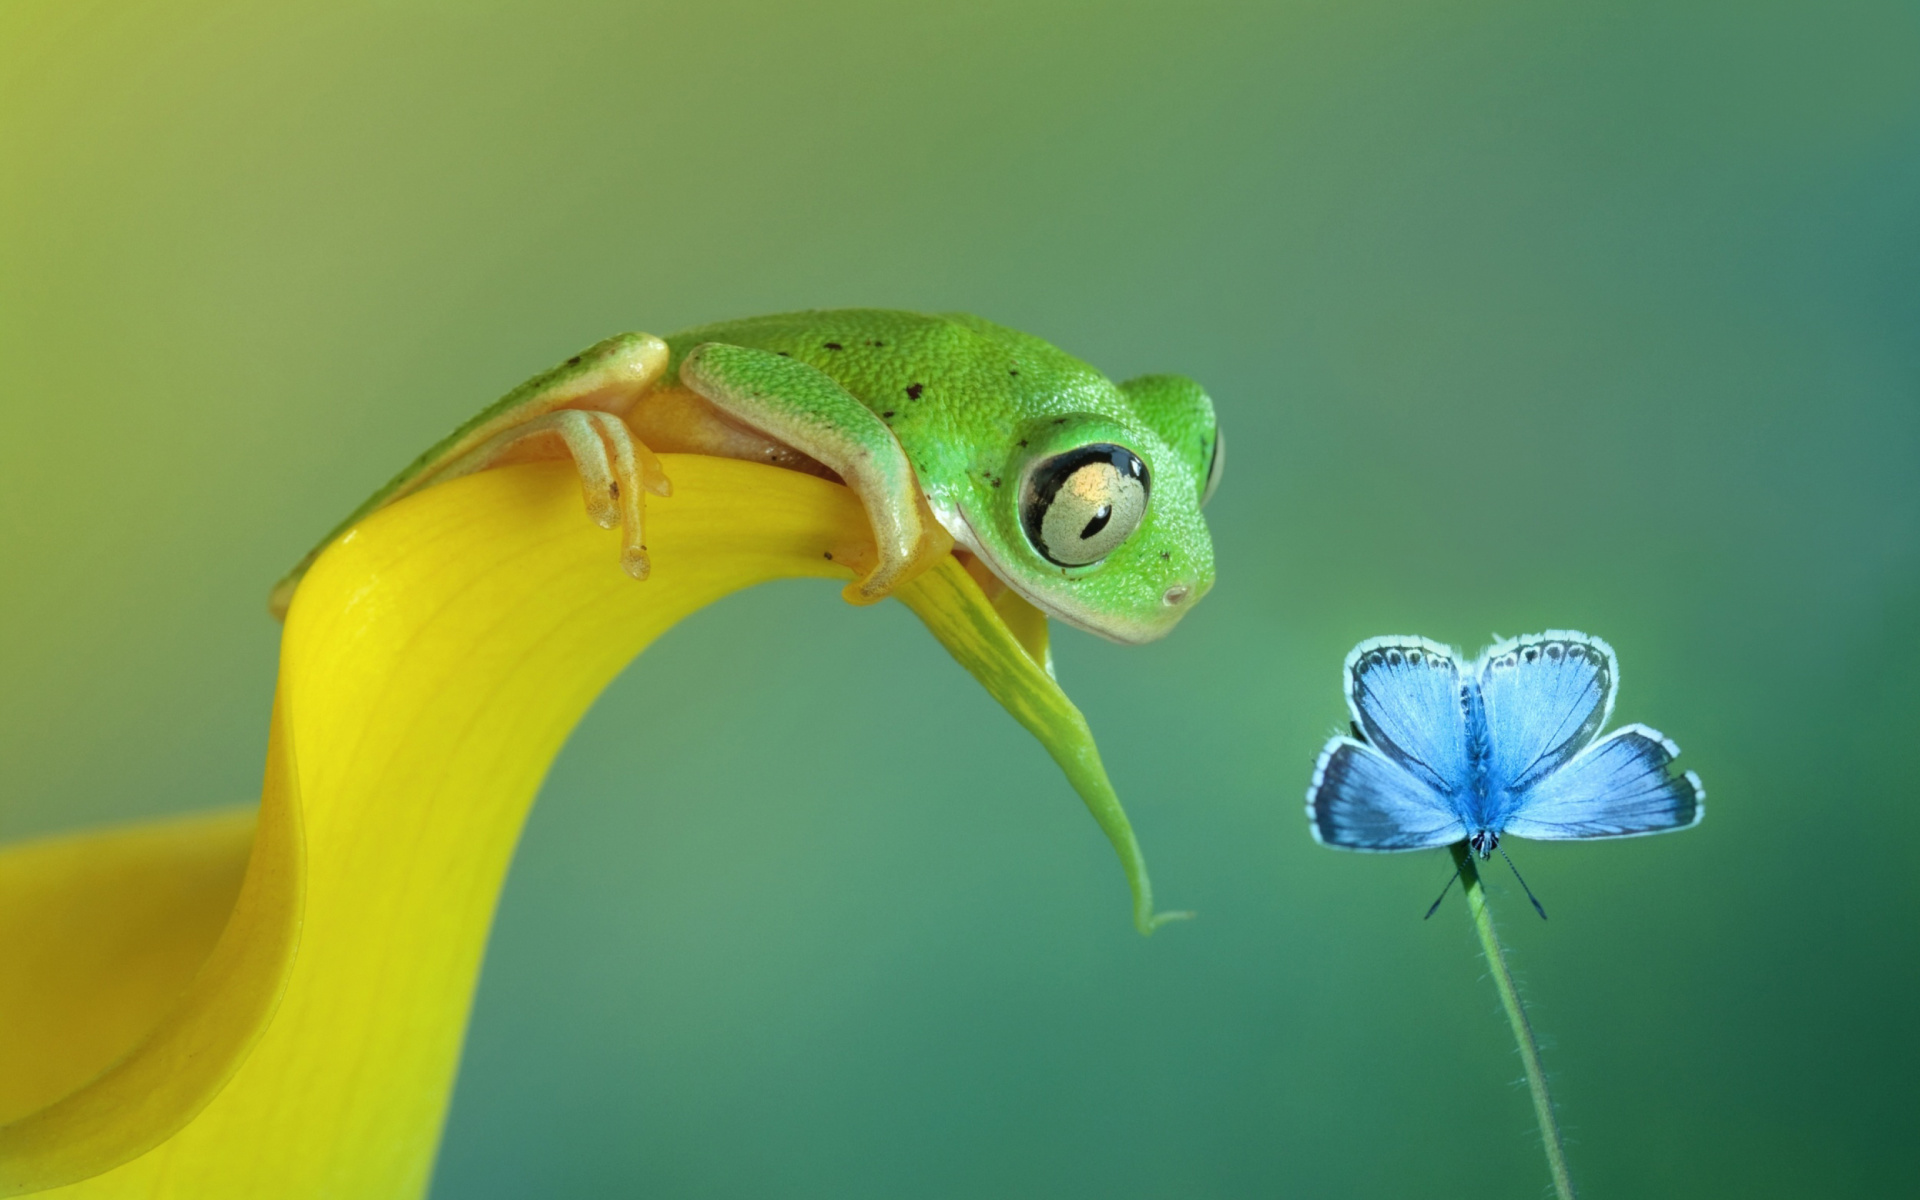 Frog and butterfly screenshot #1 1920x1200